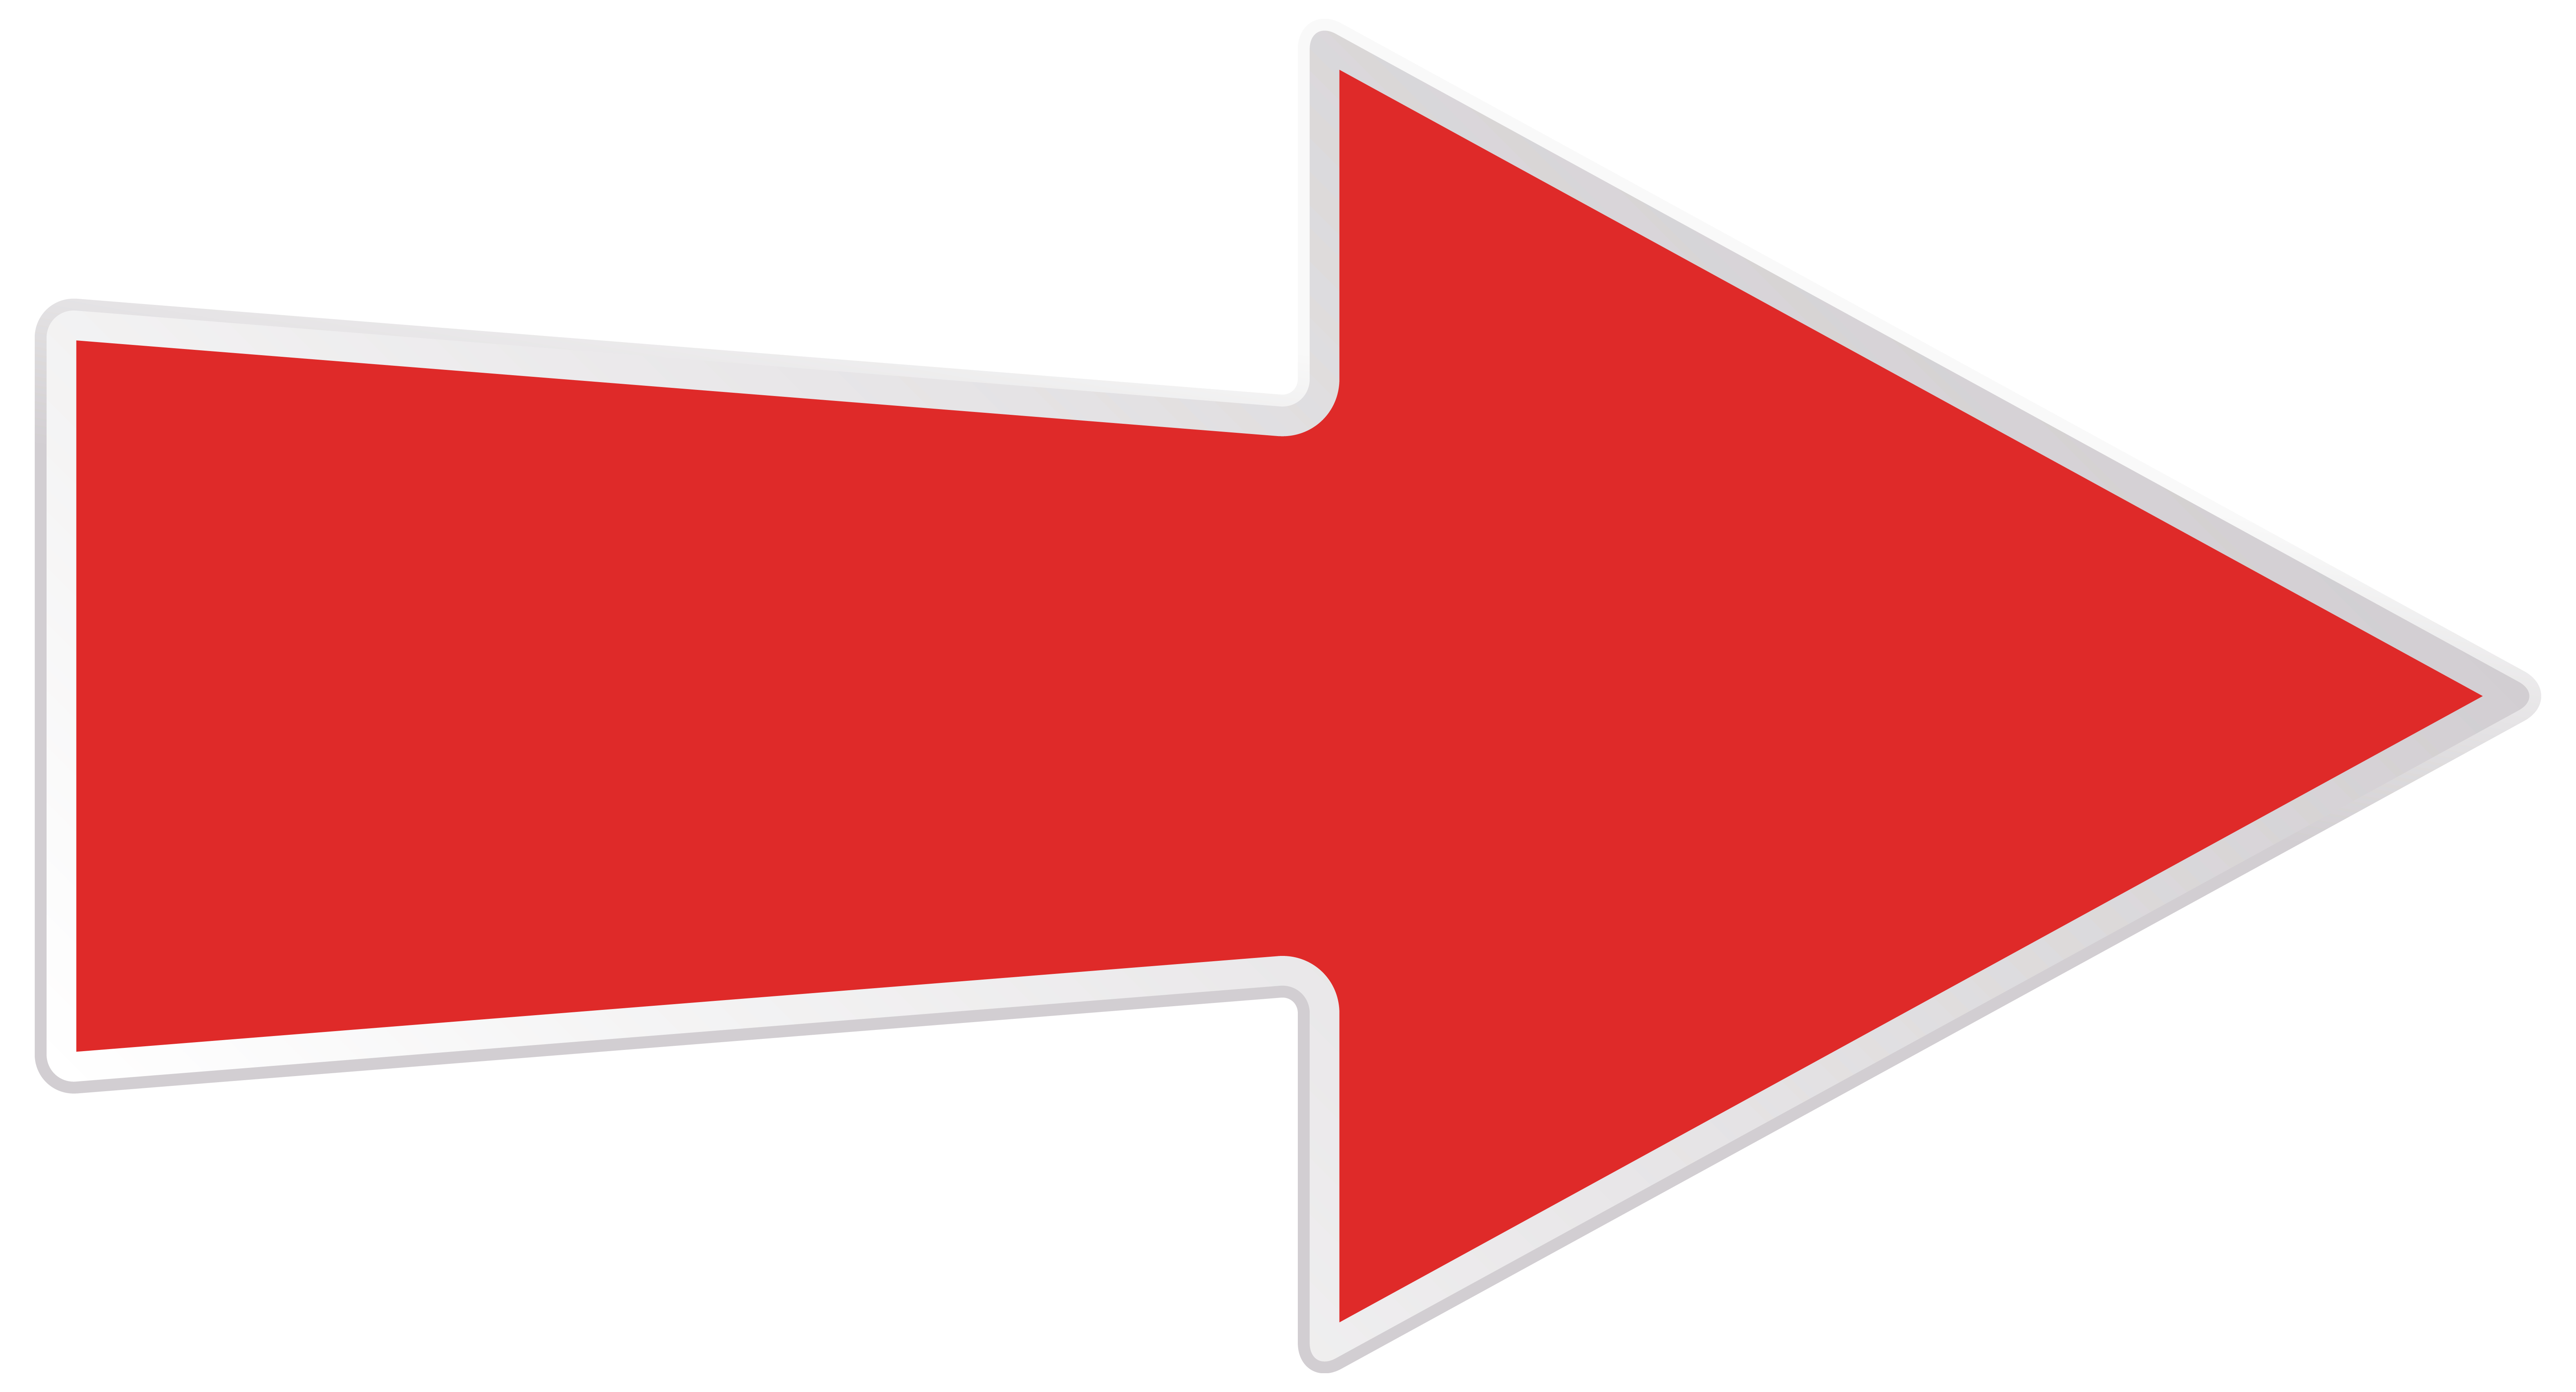 logo-line-angle-brand-red-right-arrow-transparent-png-clip-art-image